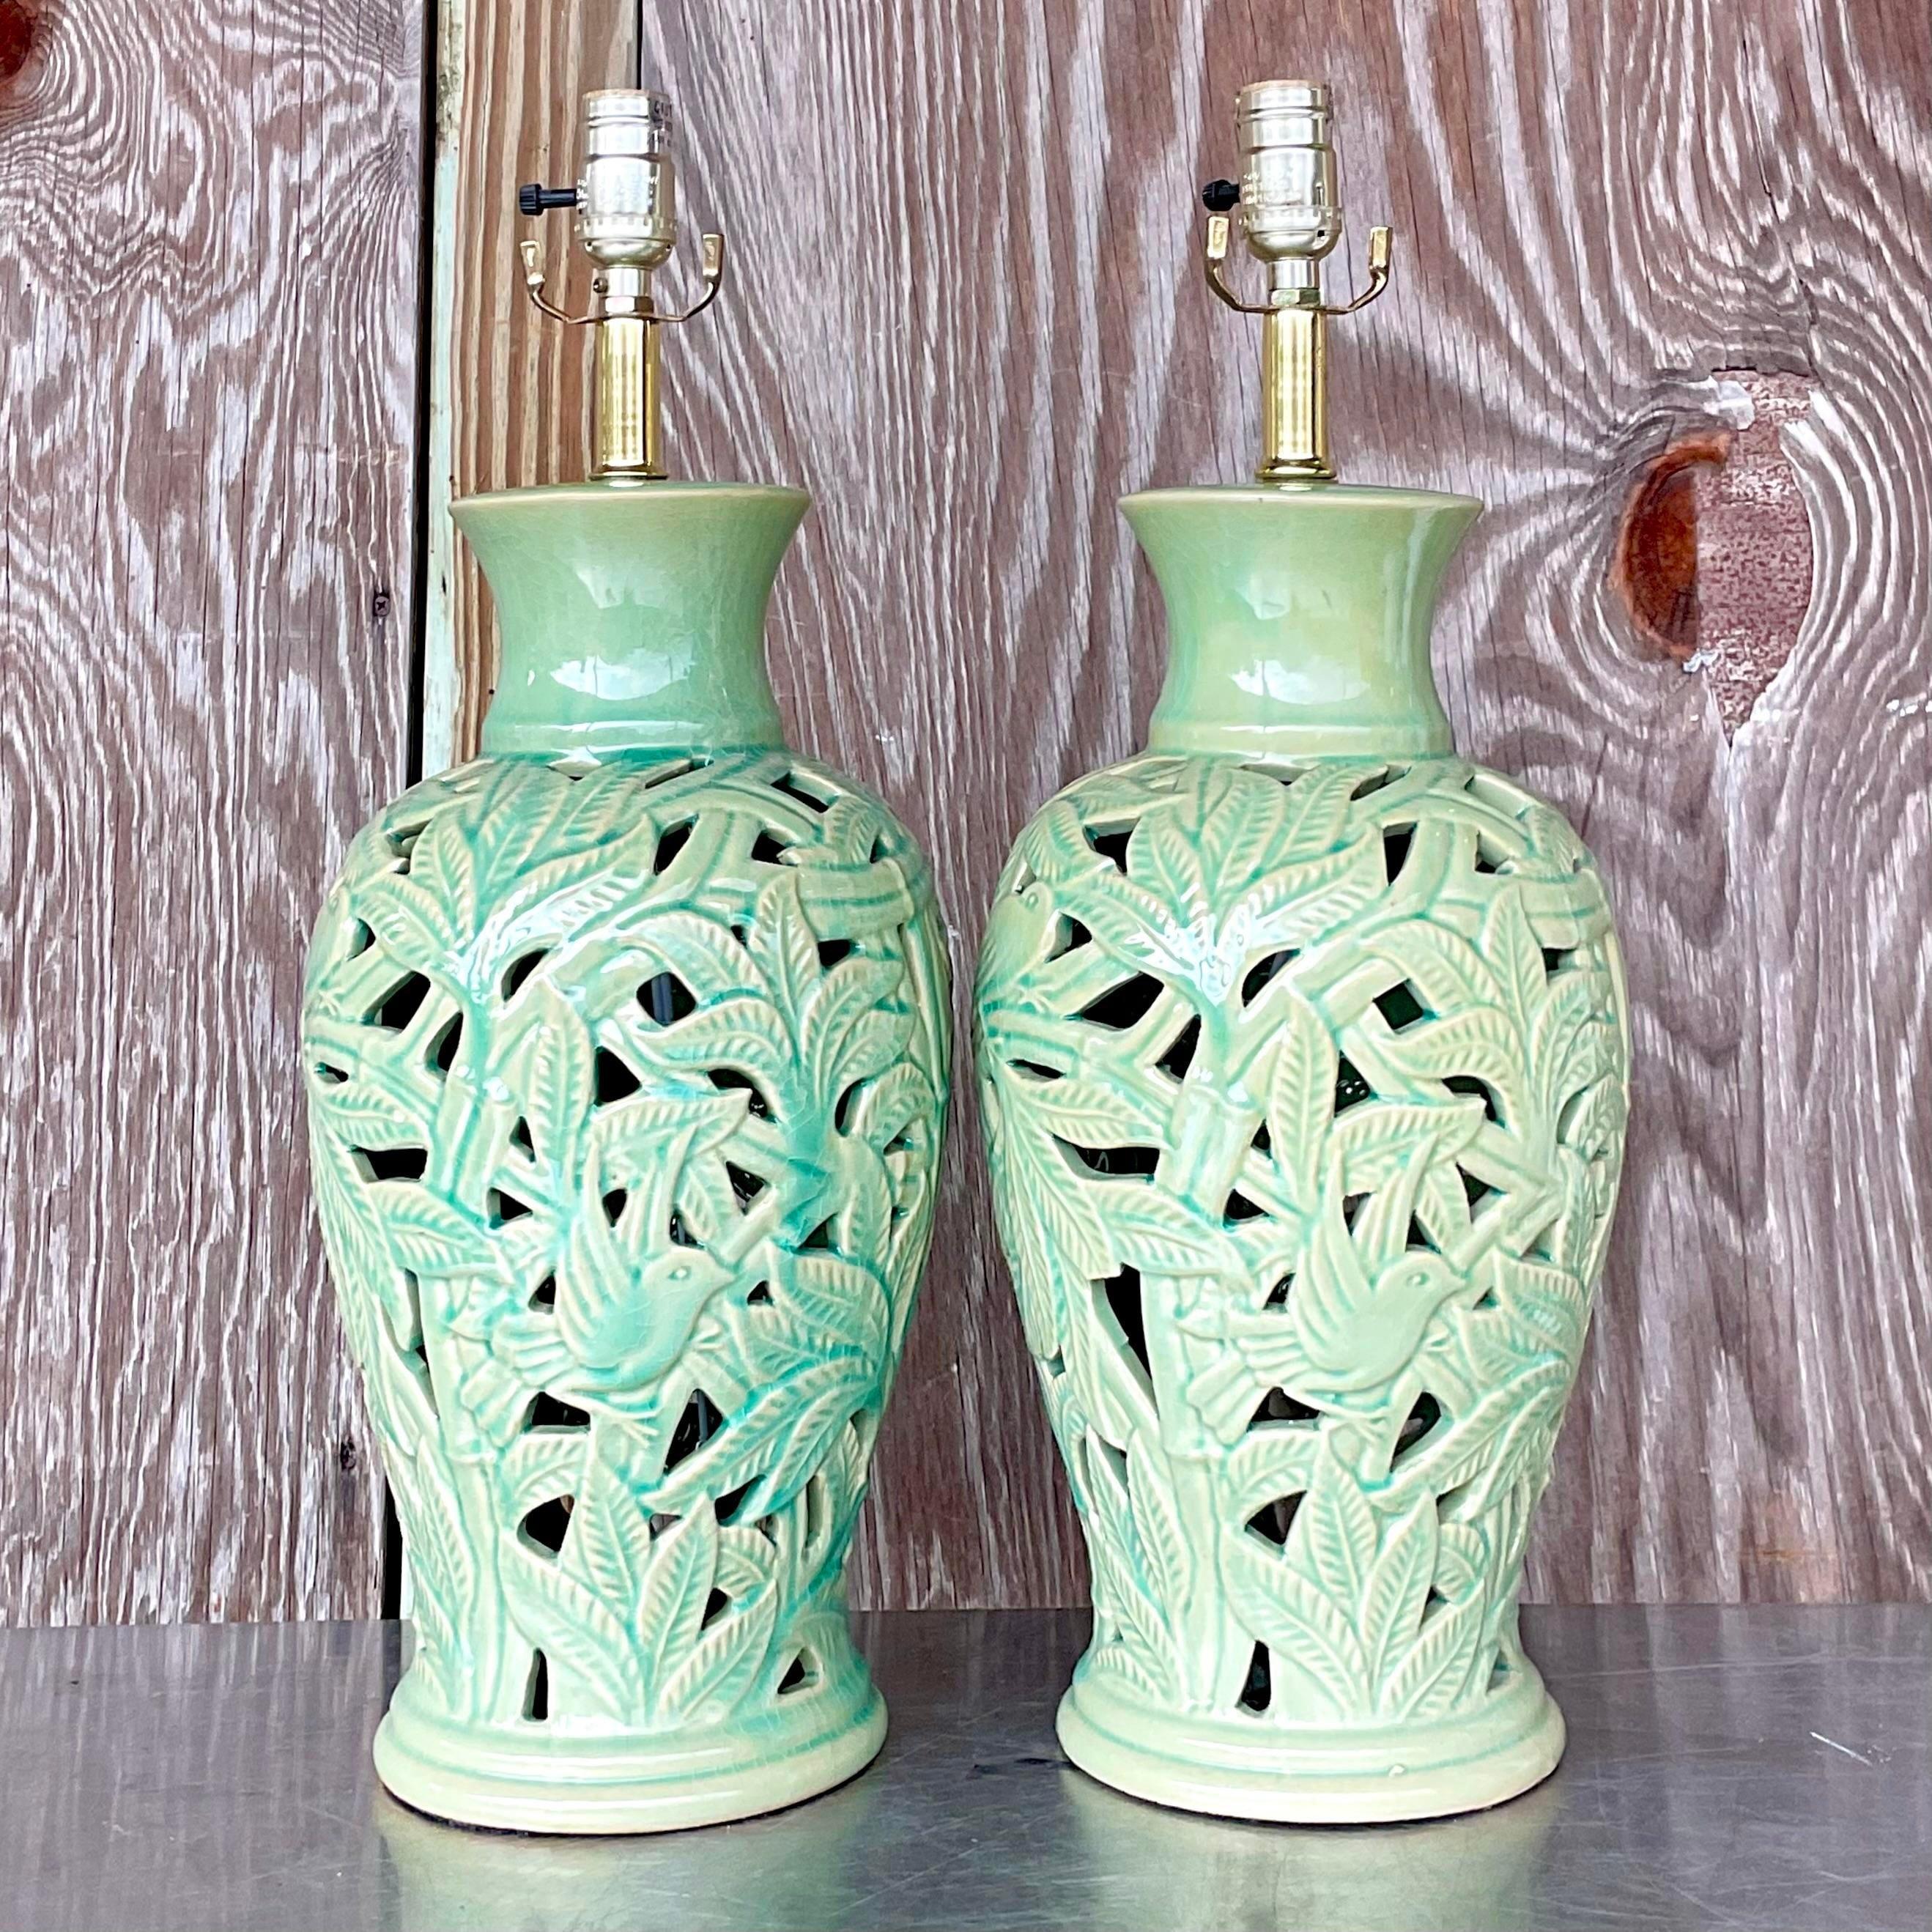 Vintage Boho Glazed Ceramic Cut Out Leaf Lamps - a Pair In Good Condition For Sale In west palm beach, FL